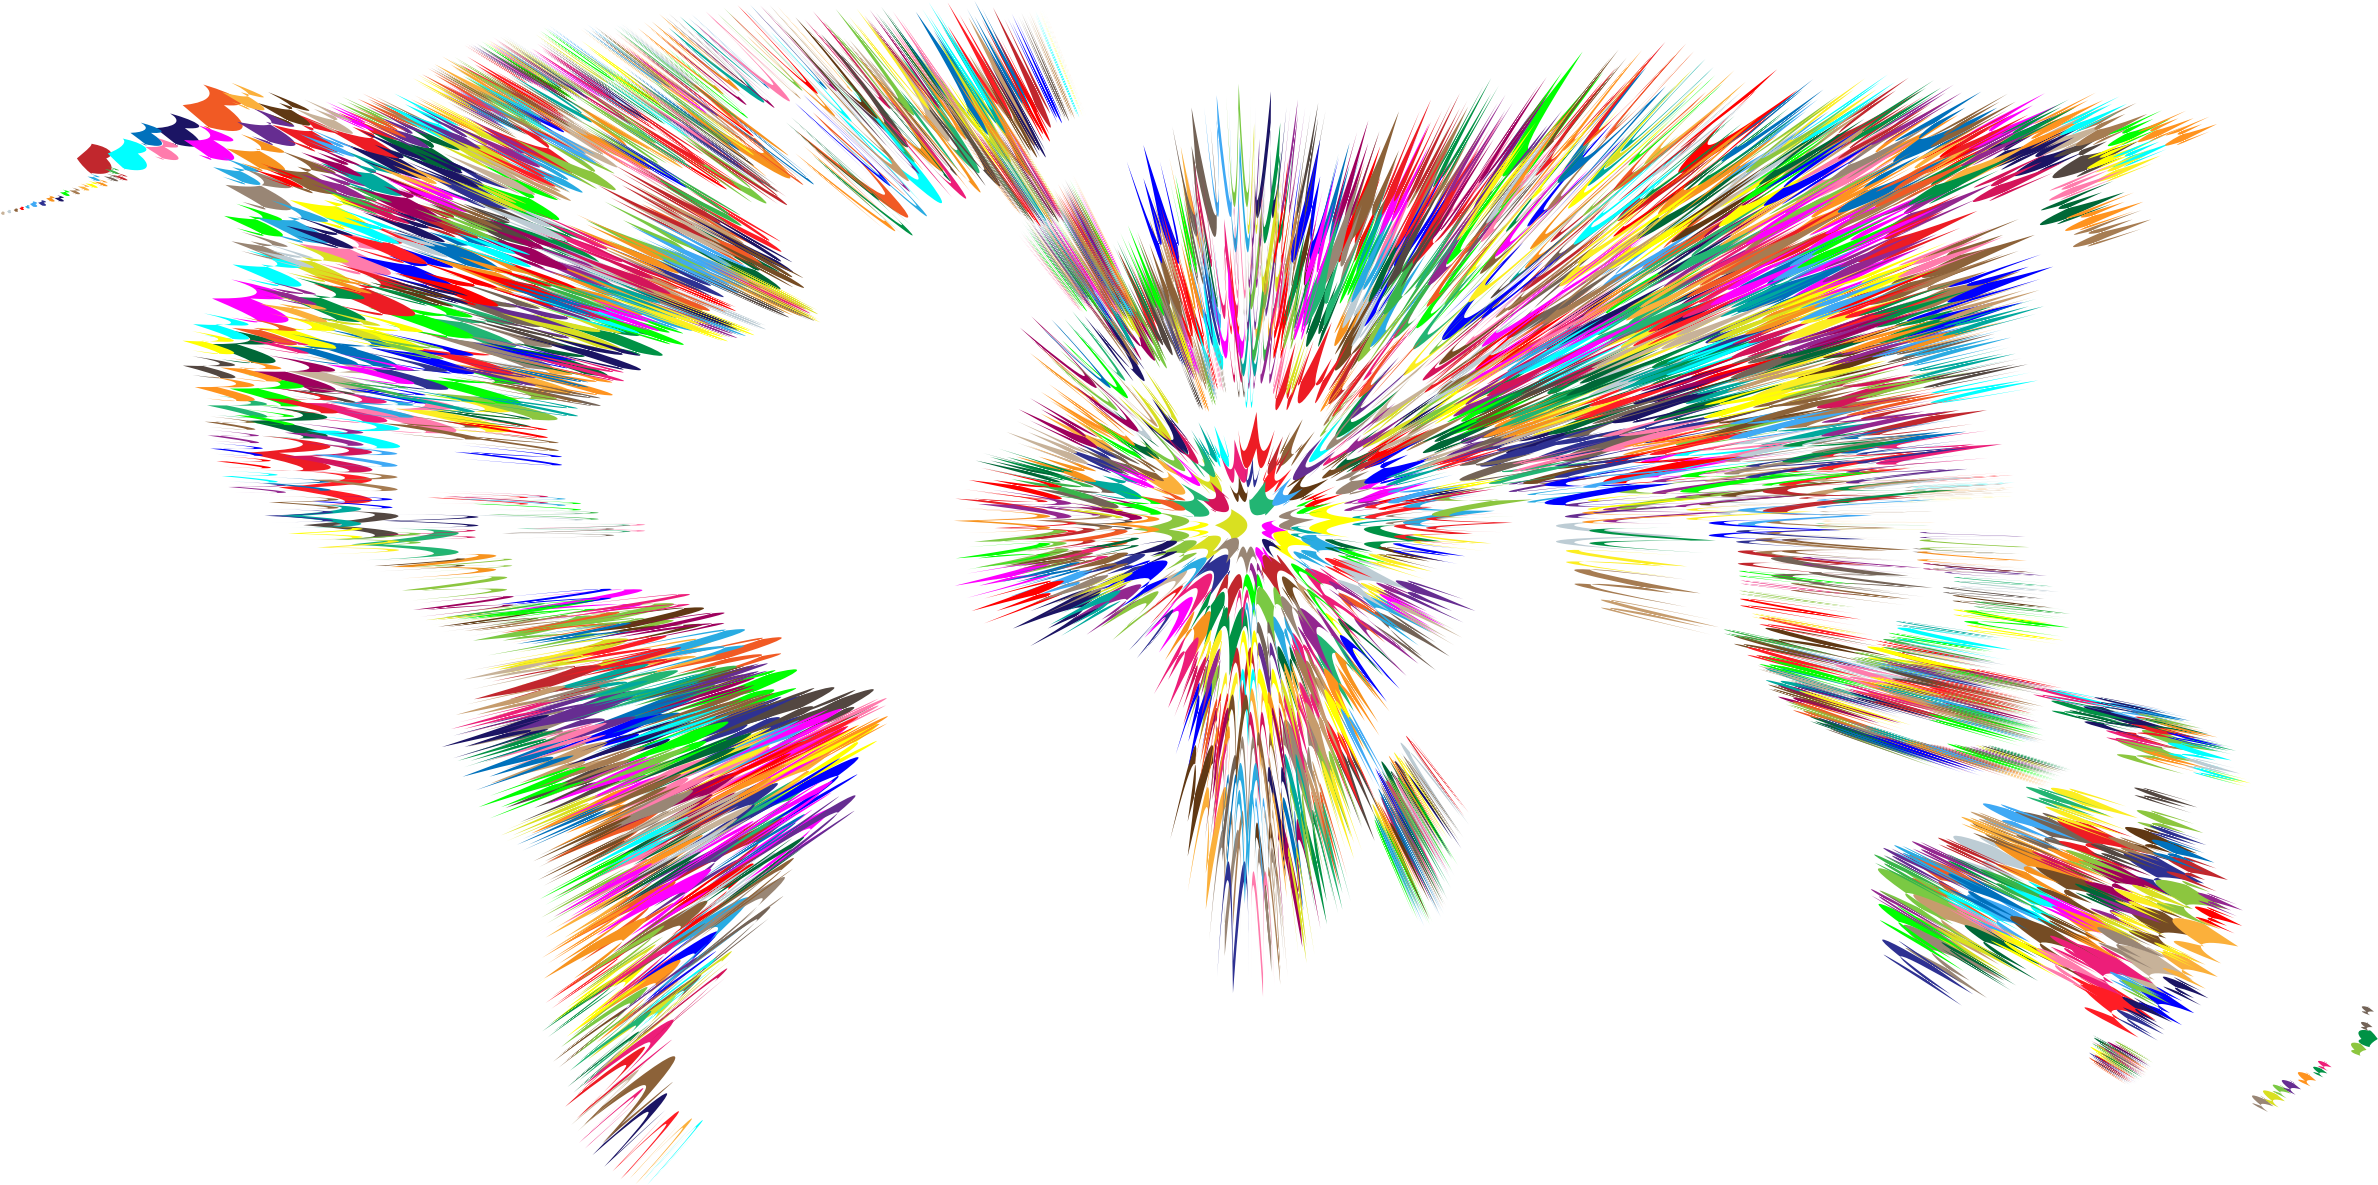 Abstract World Map PNG Transparent Image SVG Clip arts